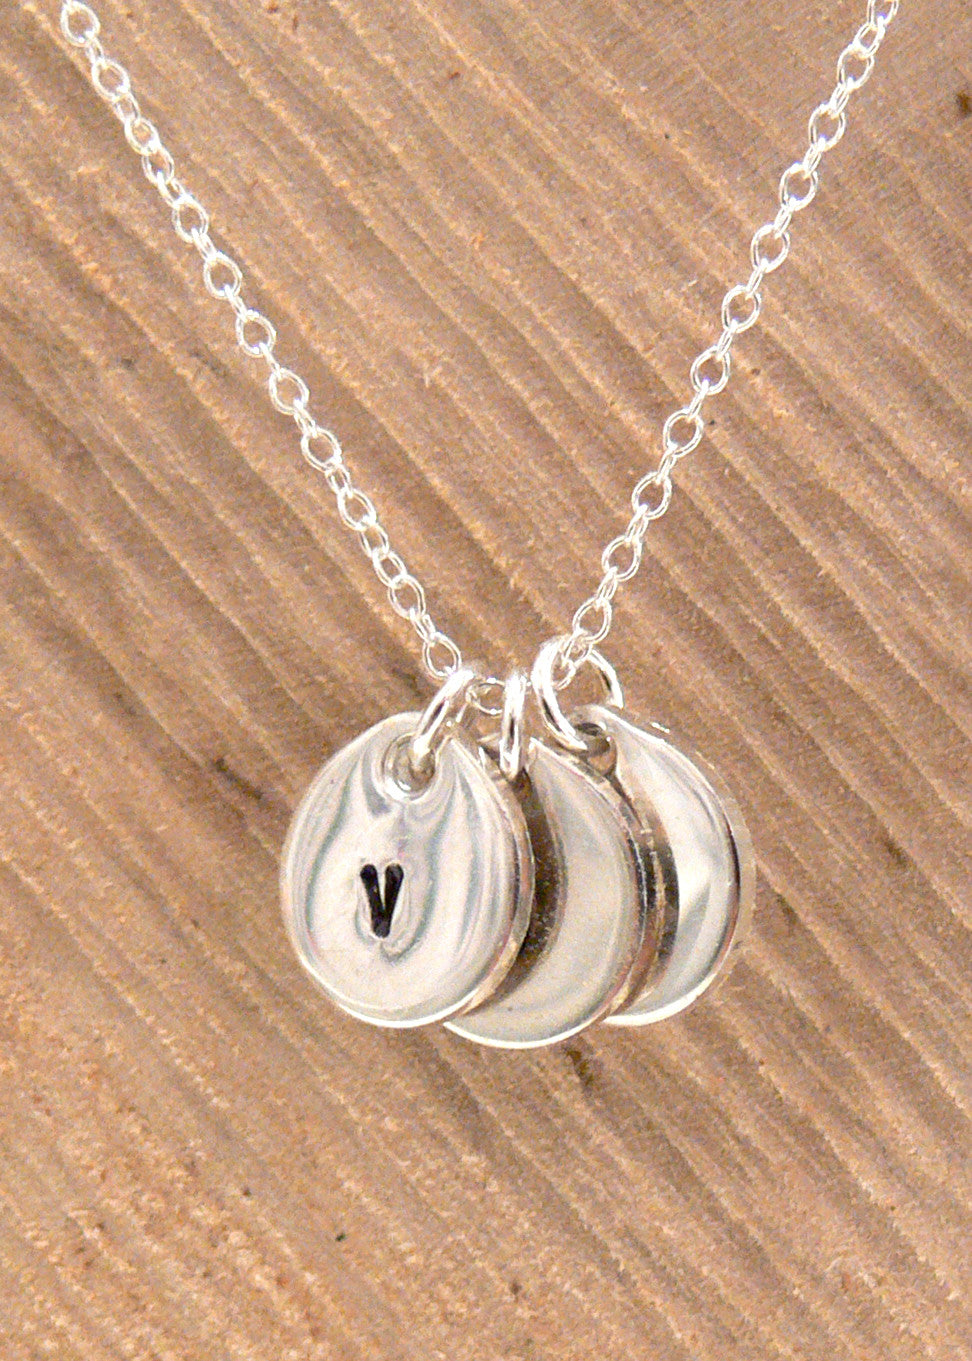 Engraved tag necklace